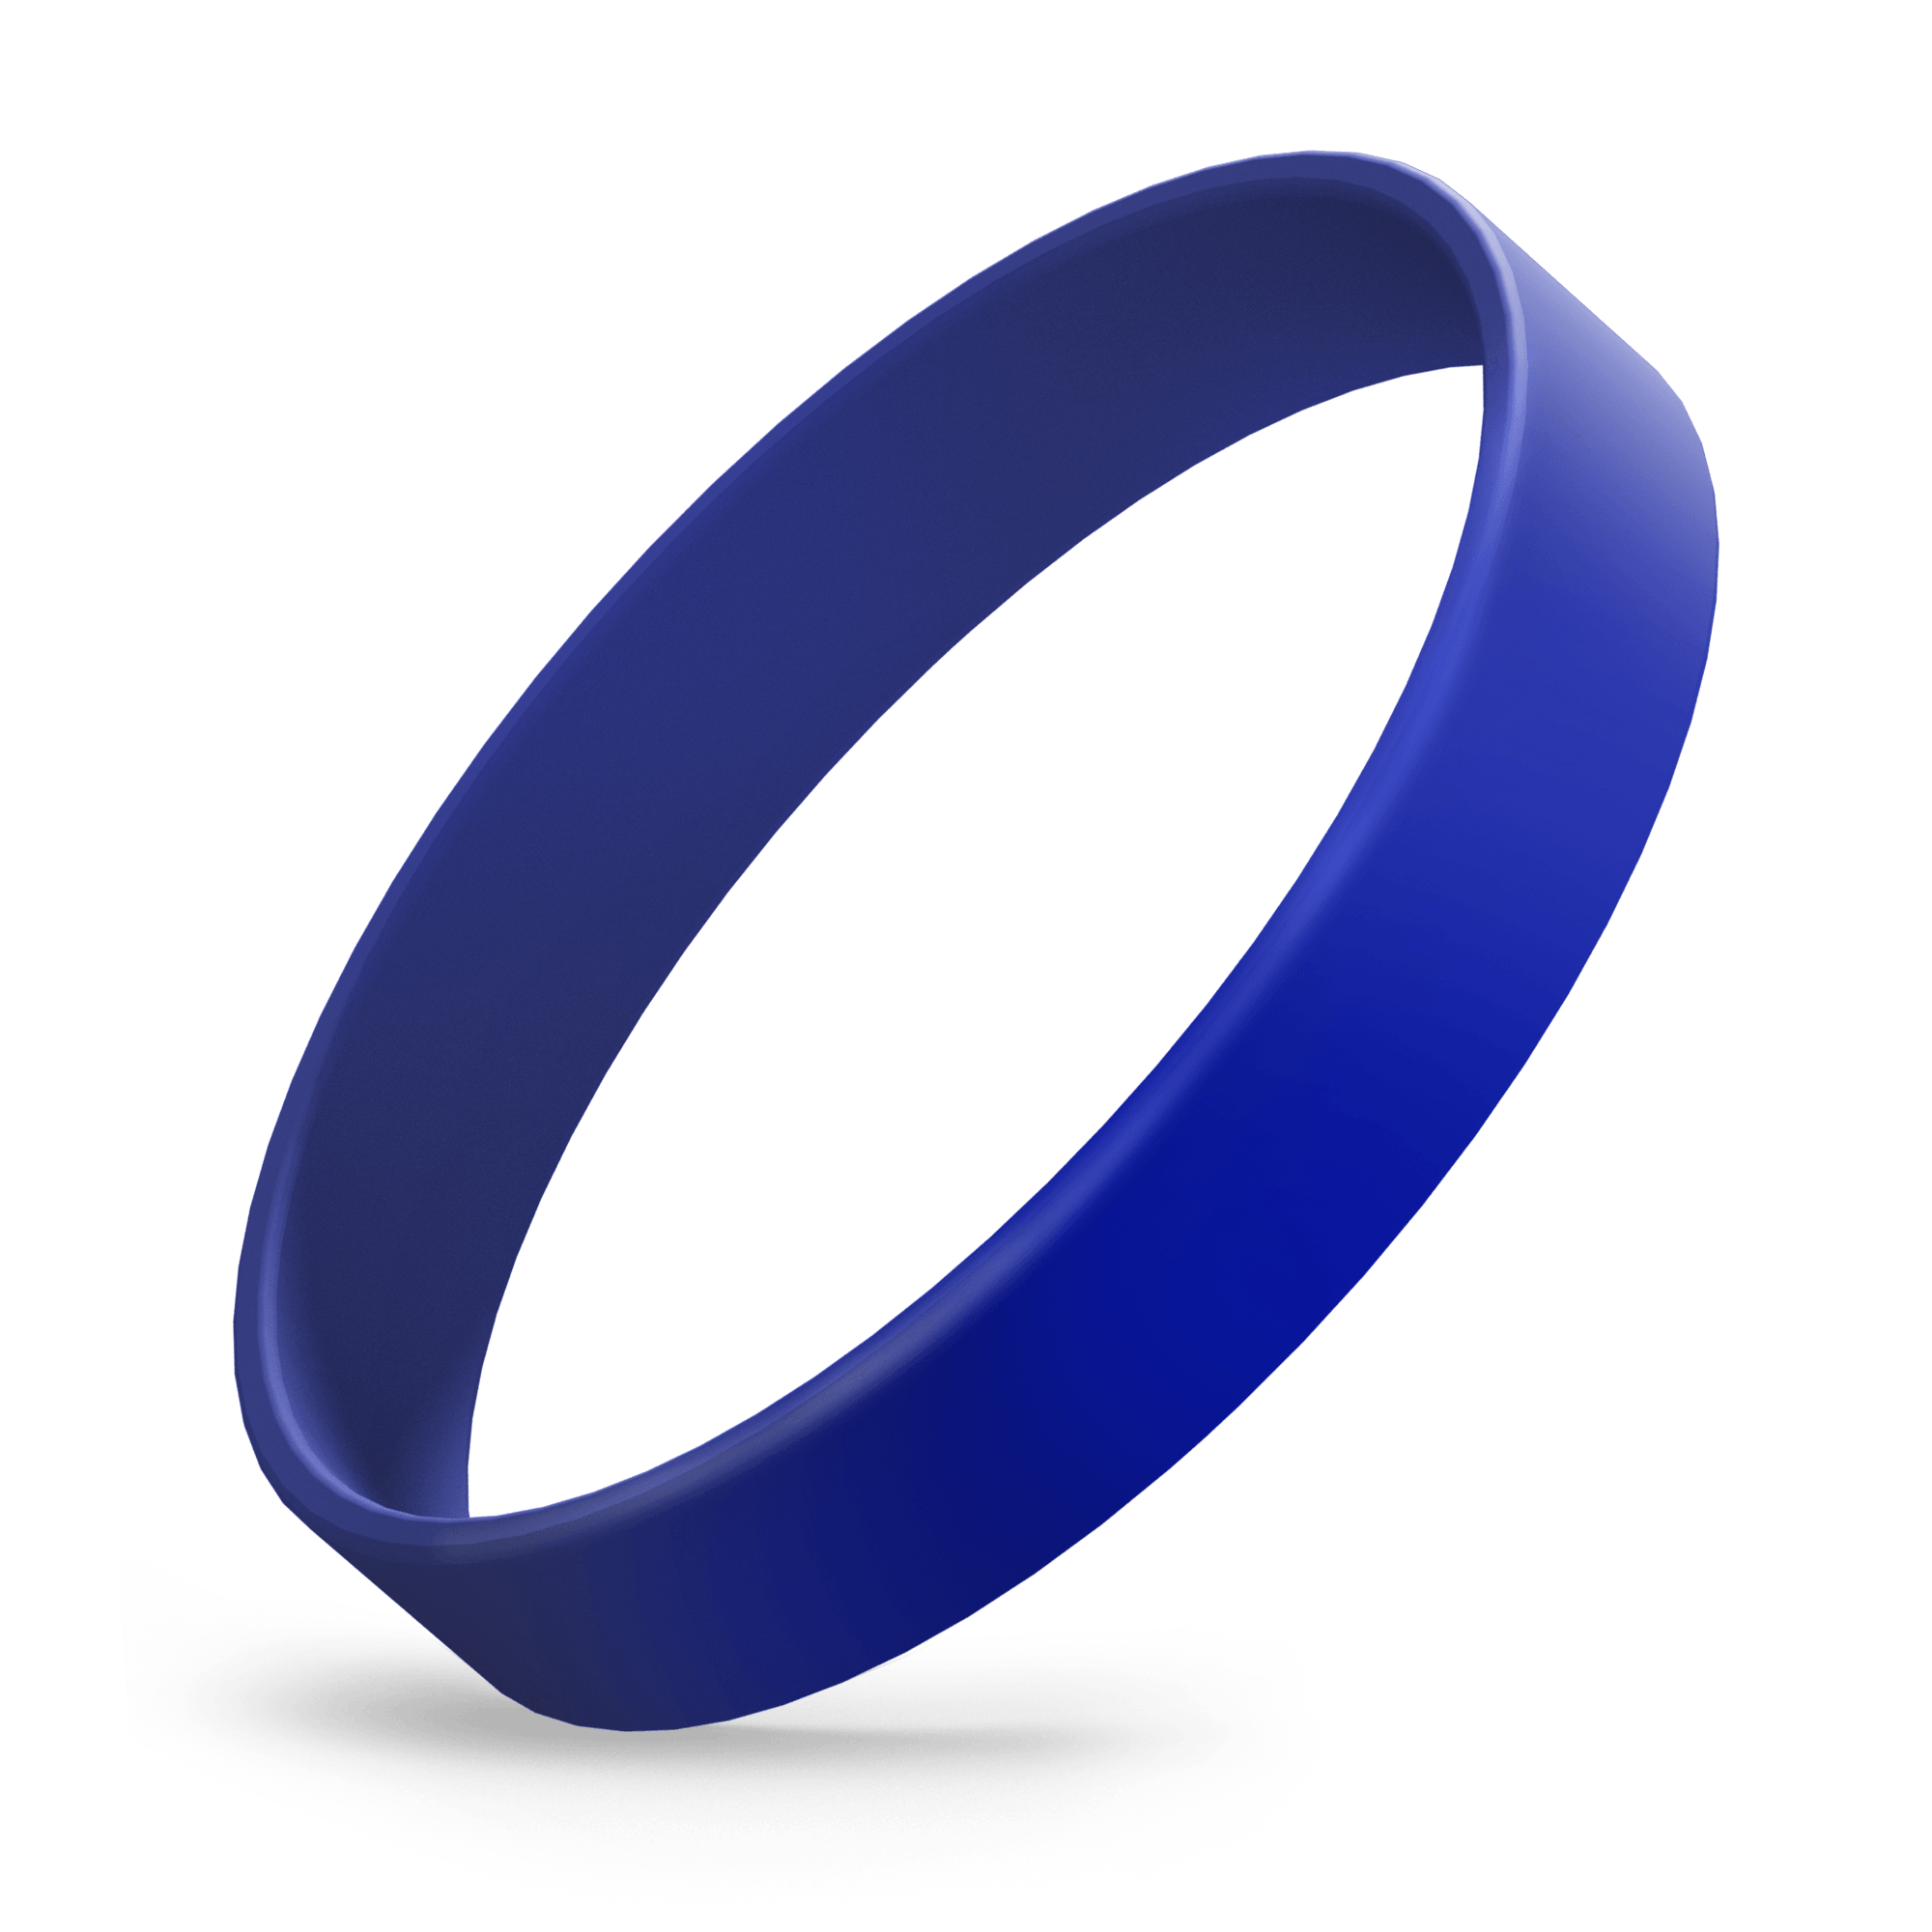 Custom Ink Injected (Reflex Blue) Silicone Wristbands - Rubber Bracelets